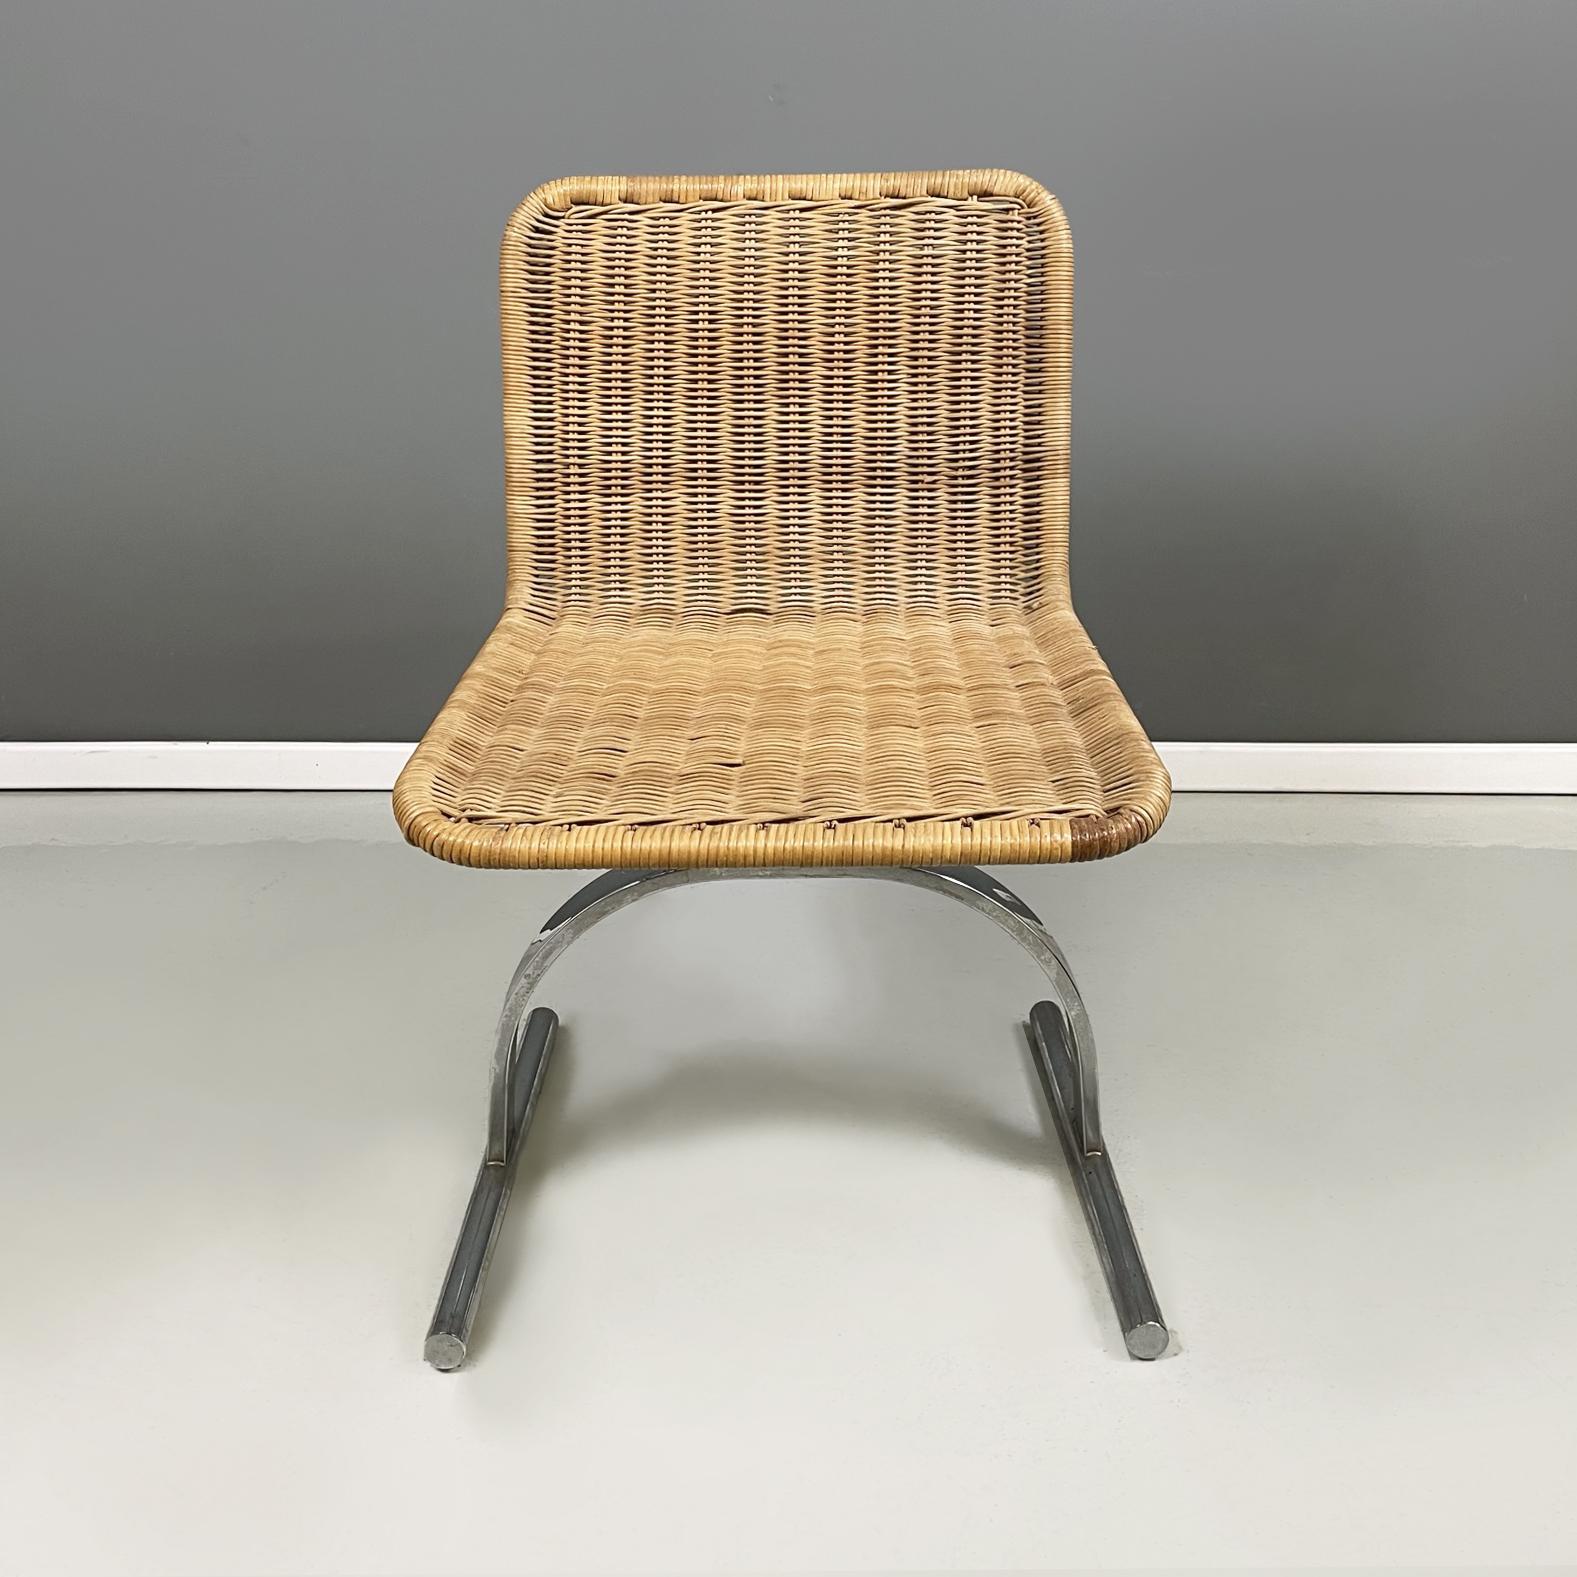 Italian modern Chairs in straw and steel, 1970s
Set of 5 chairs with seat and back with rounded corners in finely woven straw. The steel structure is composed of two semicircles, one of which ends with two cylindrical feet.
From 1970s.
Good